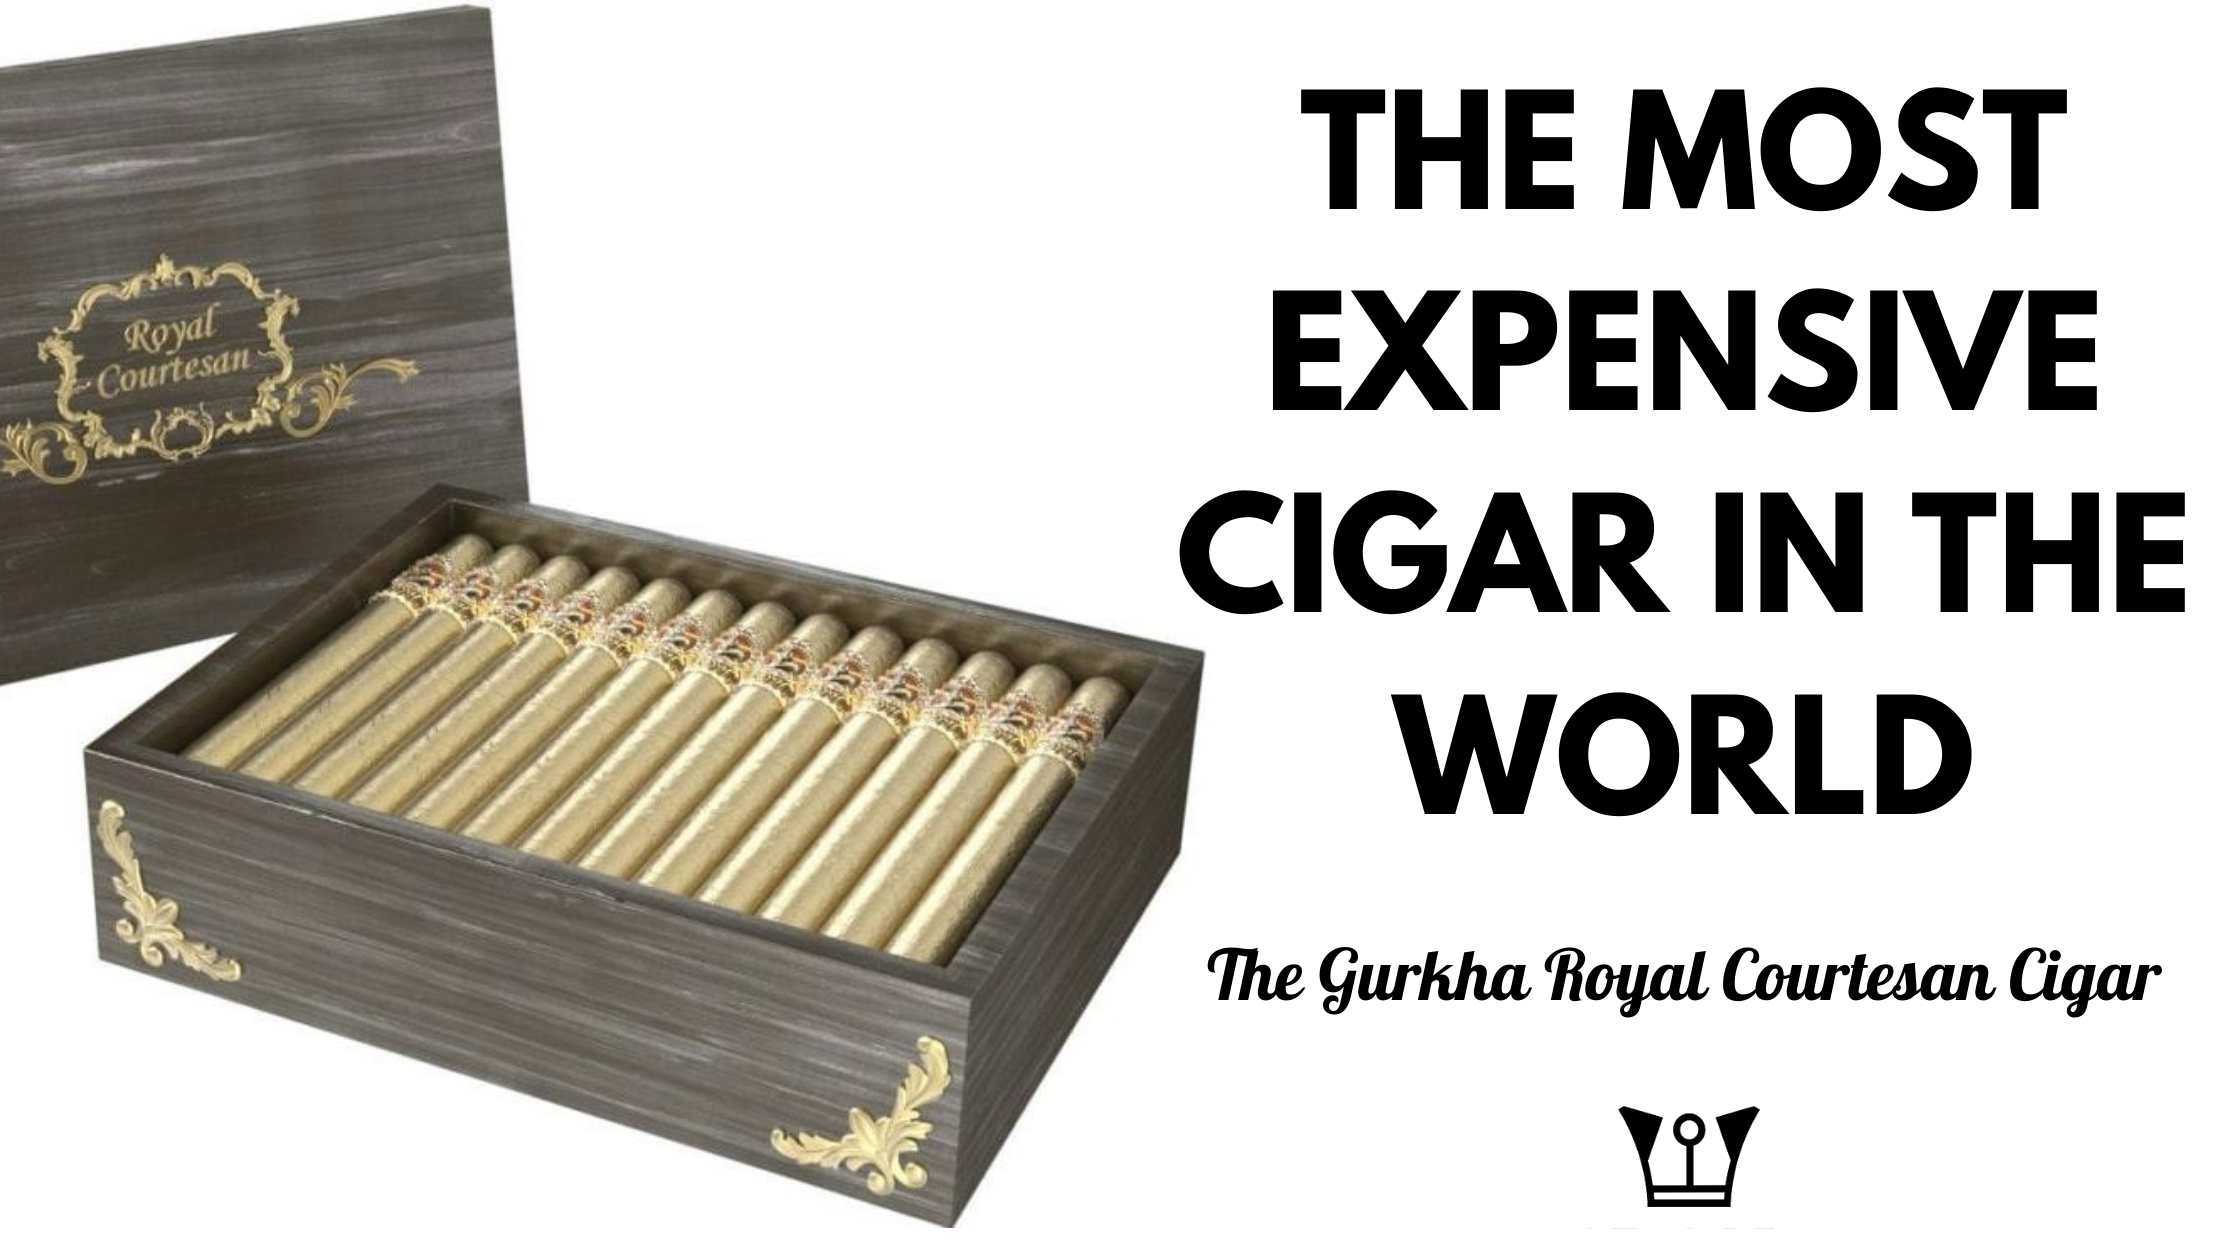 The Most Expensive Cigar in the World